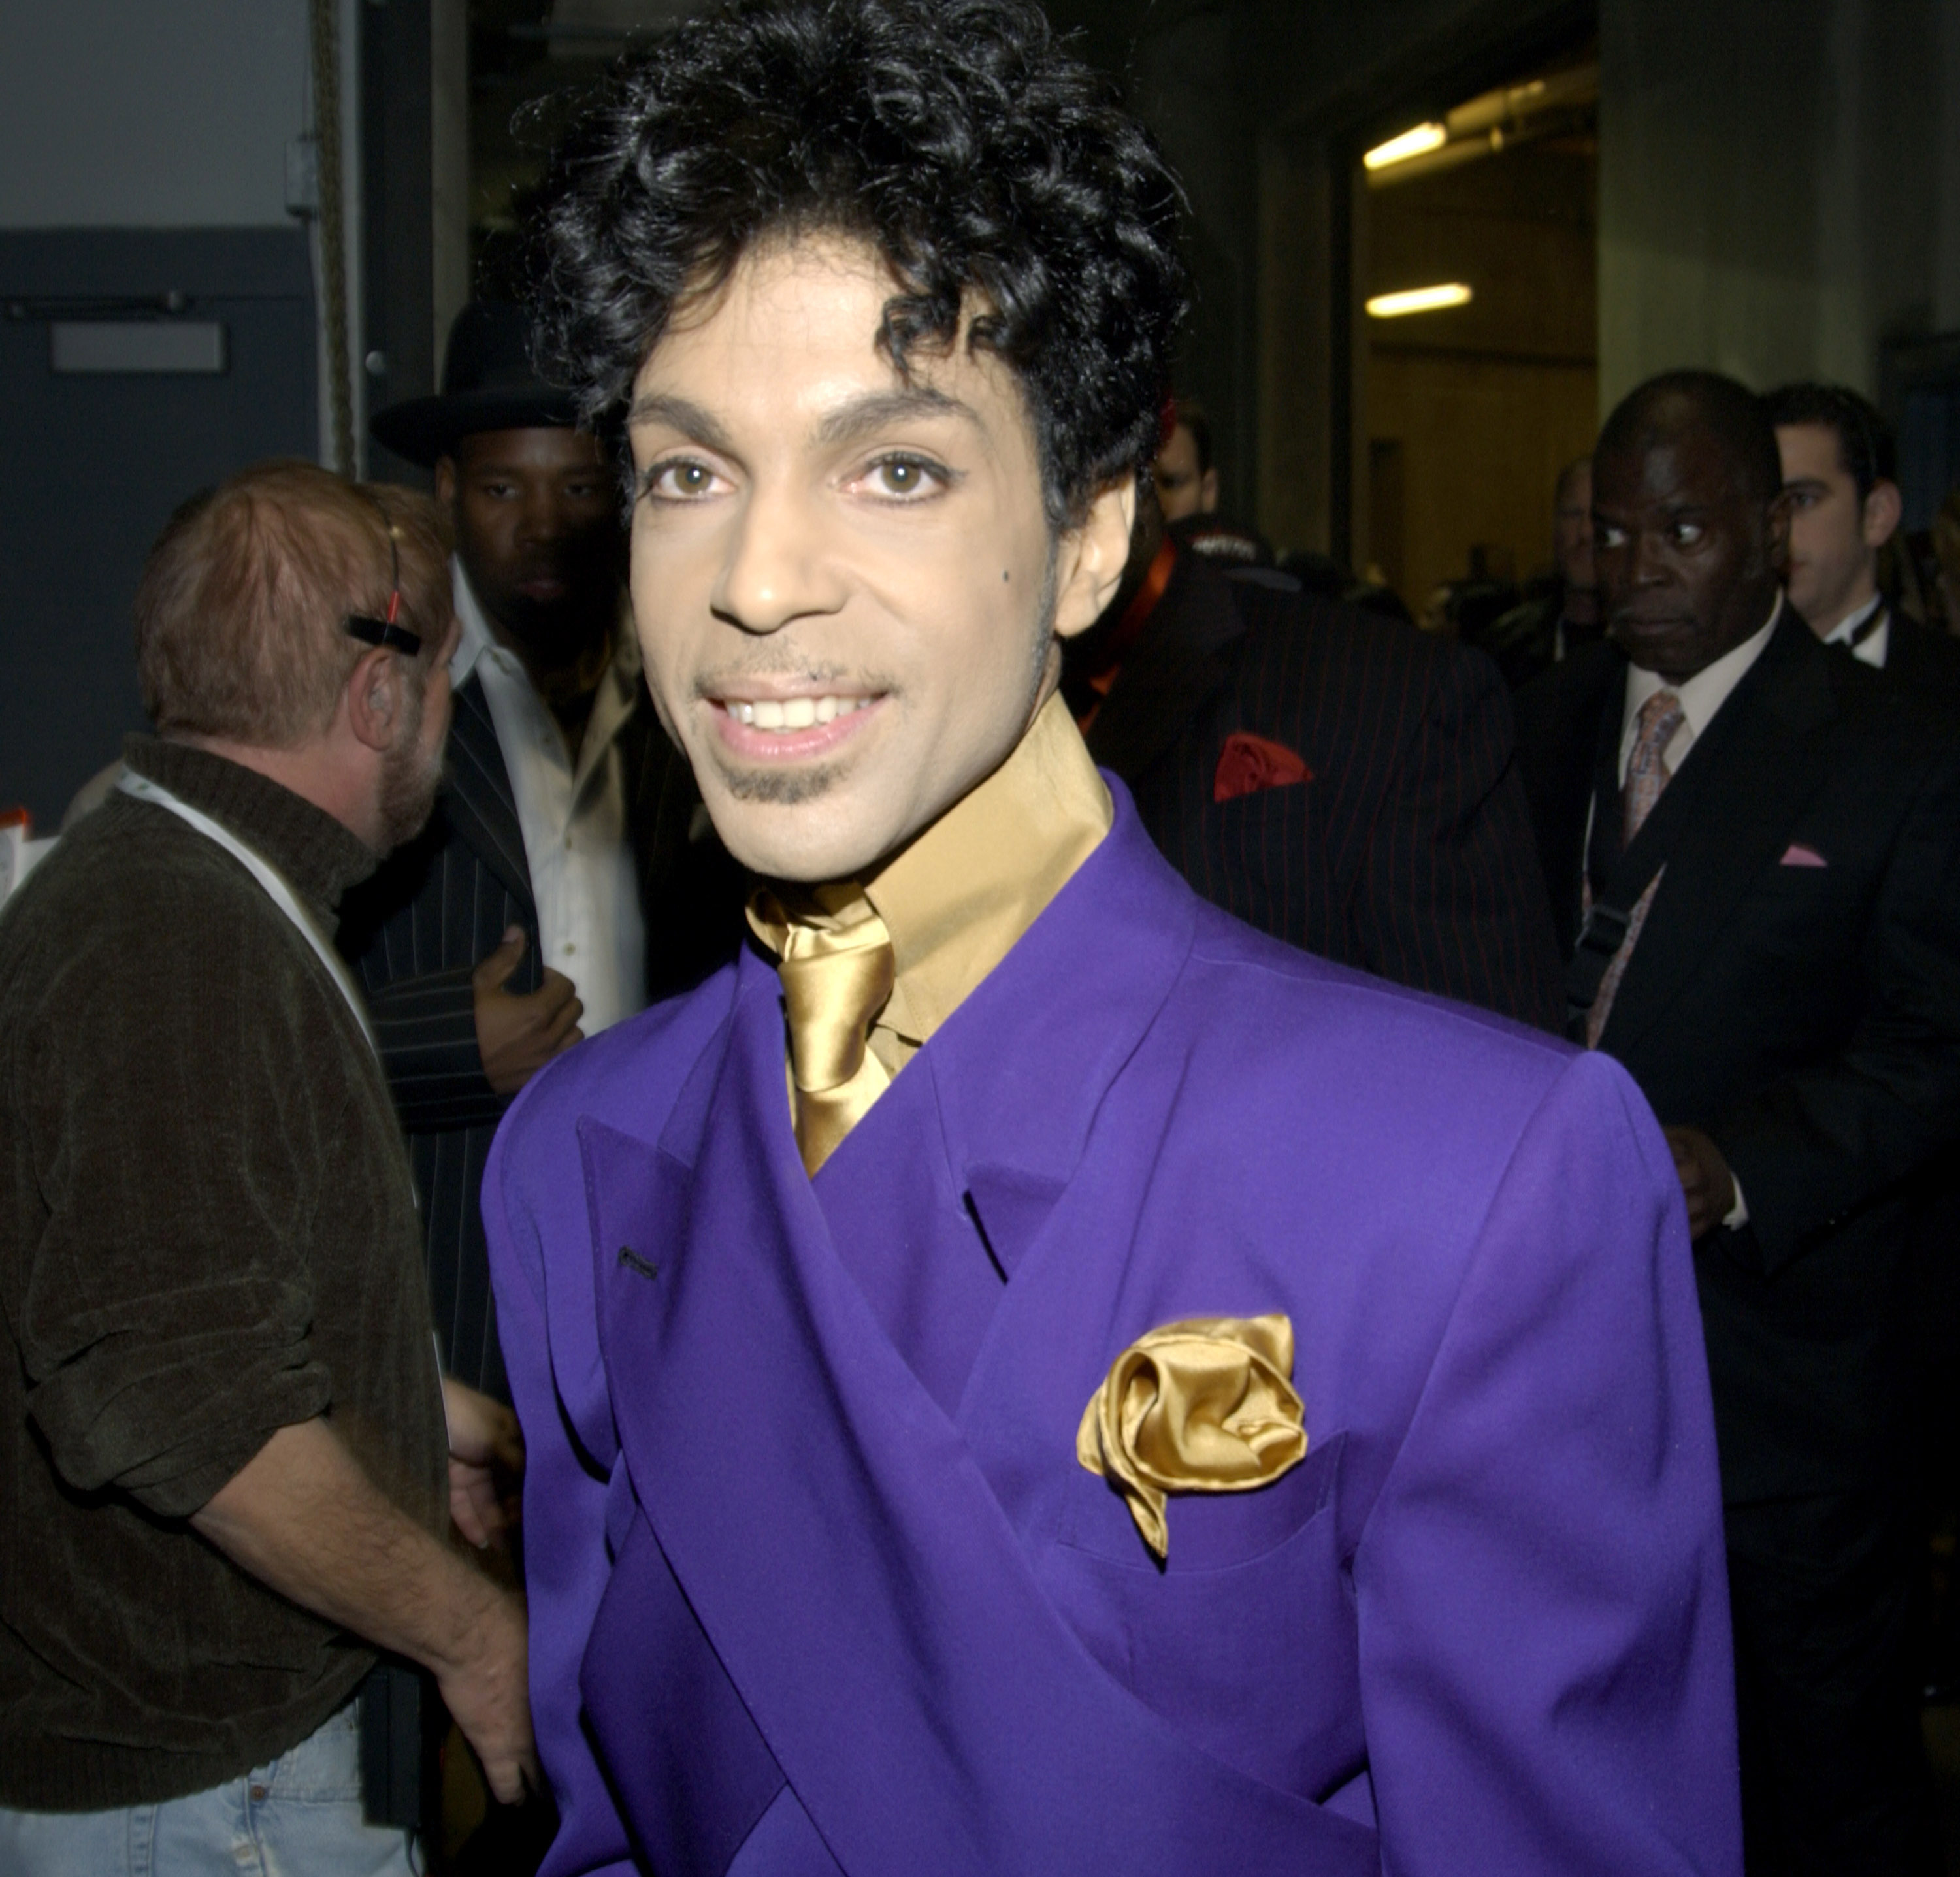 Prince attends the 46th Annual Grammy Awards on February 8, 2004 | Source: Getty Images